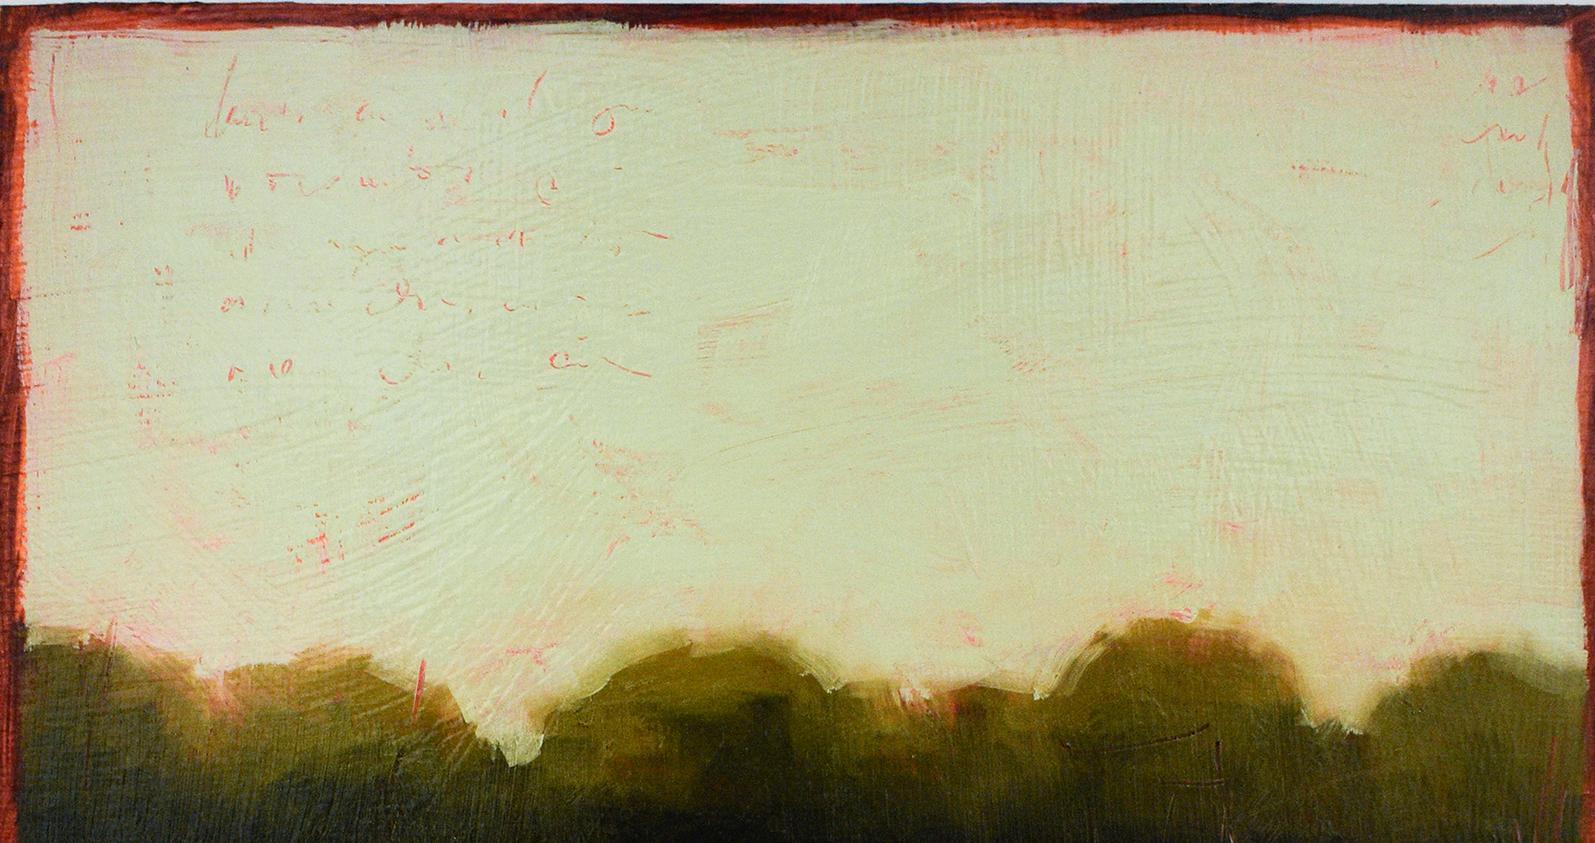 Minimal, abstracted landscape of a pink field with a dark green tree line under a mint green sky
oil on birch panel, 10 x 8 inches
Ready to hang as is, no frame required, edges of the panel are painted soft black
Signed, verso

This modern American